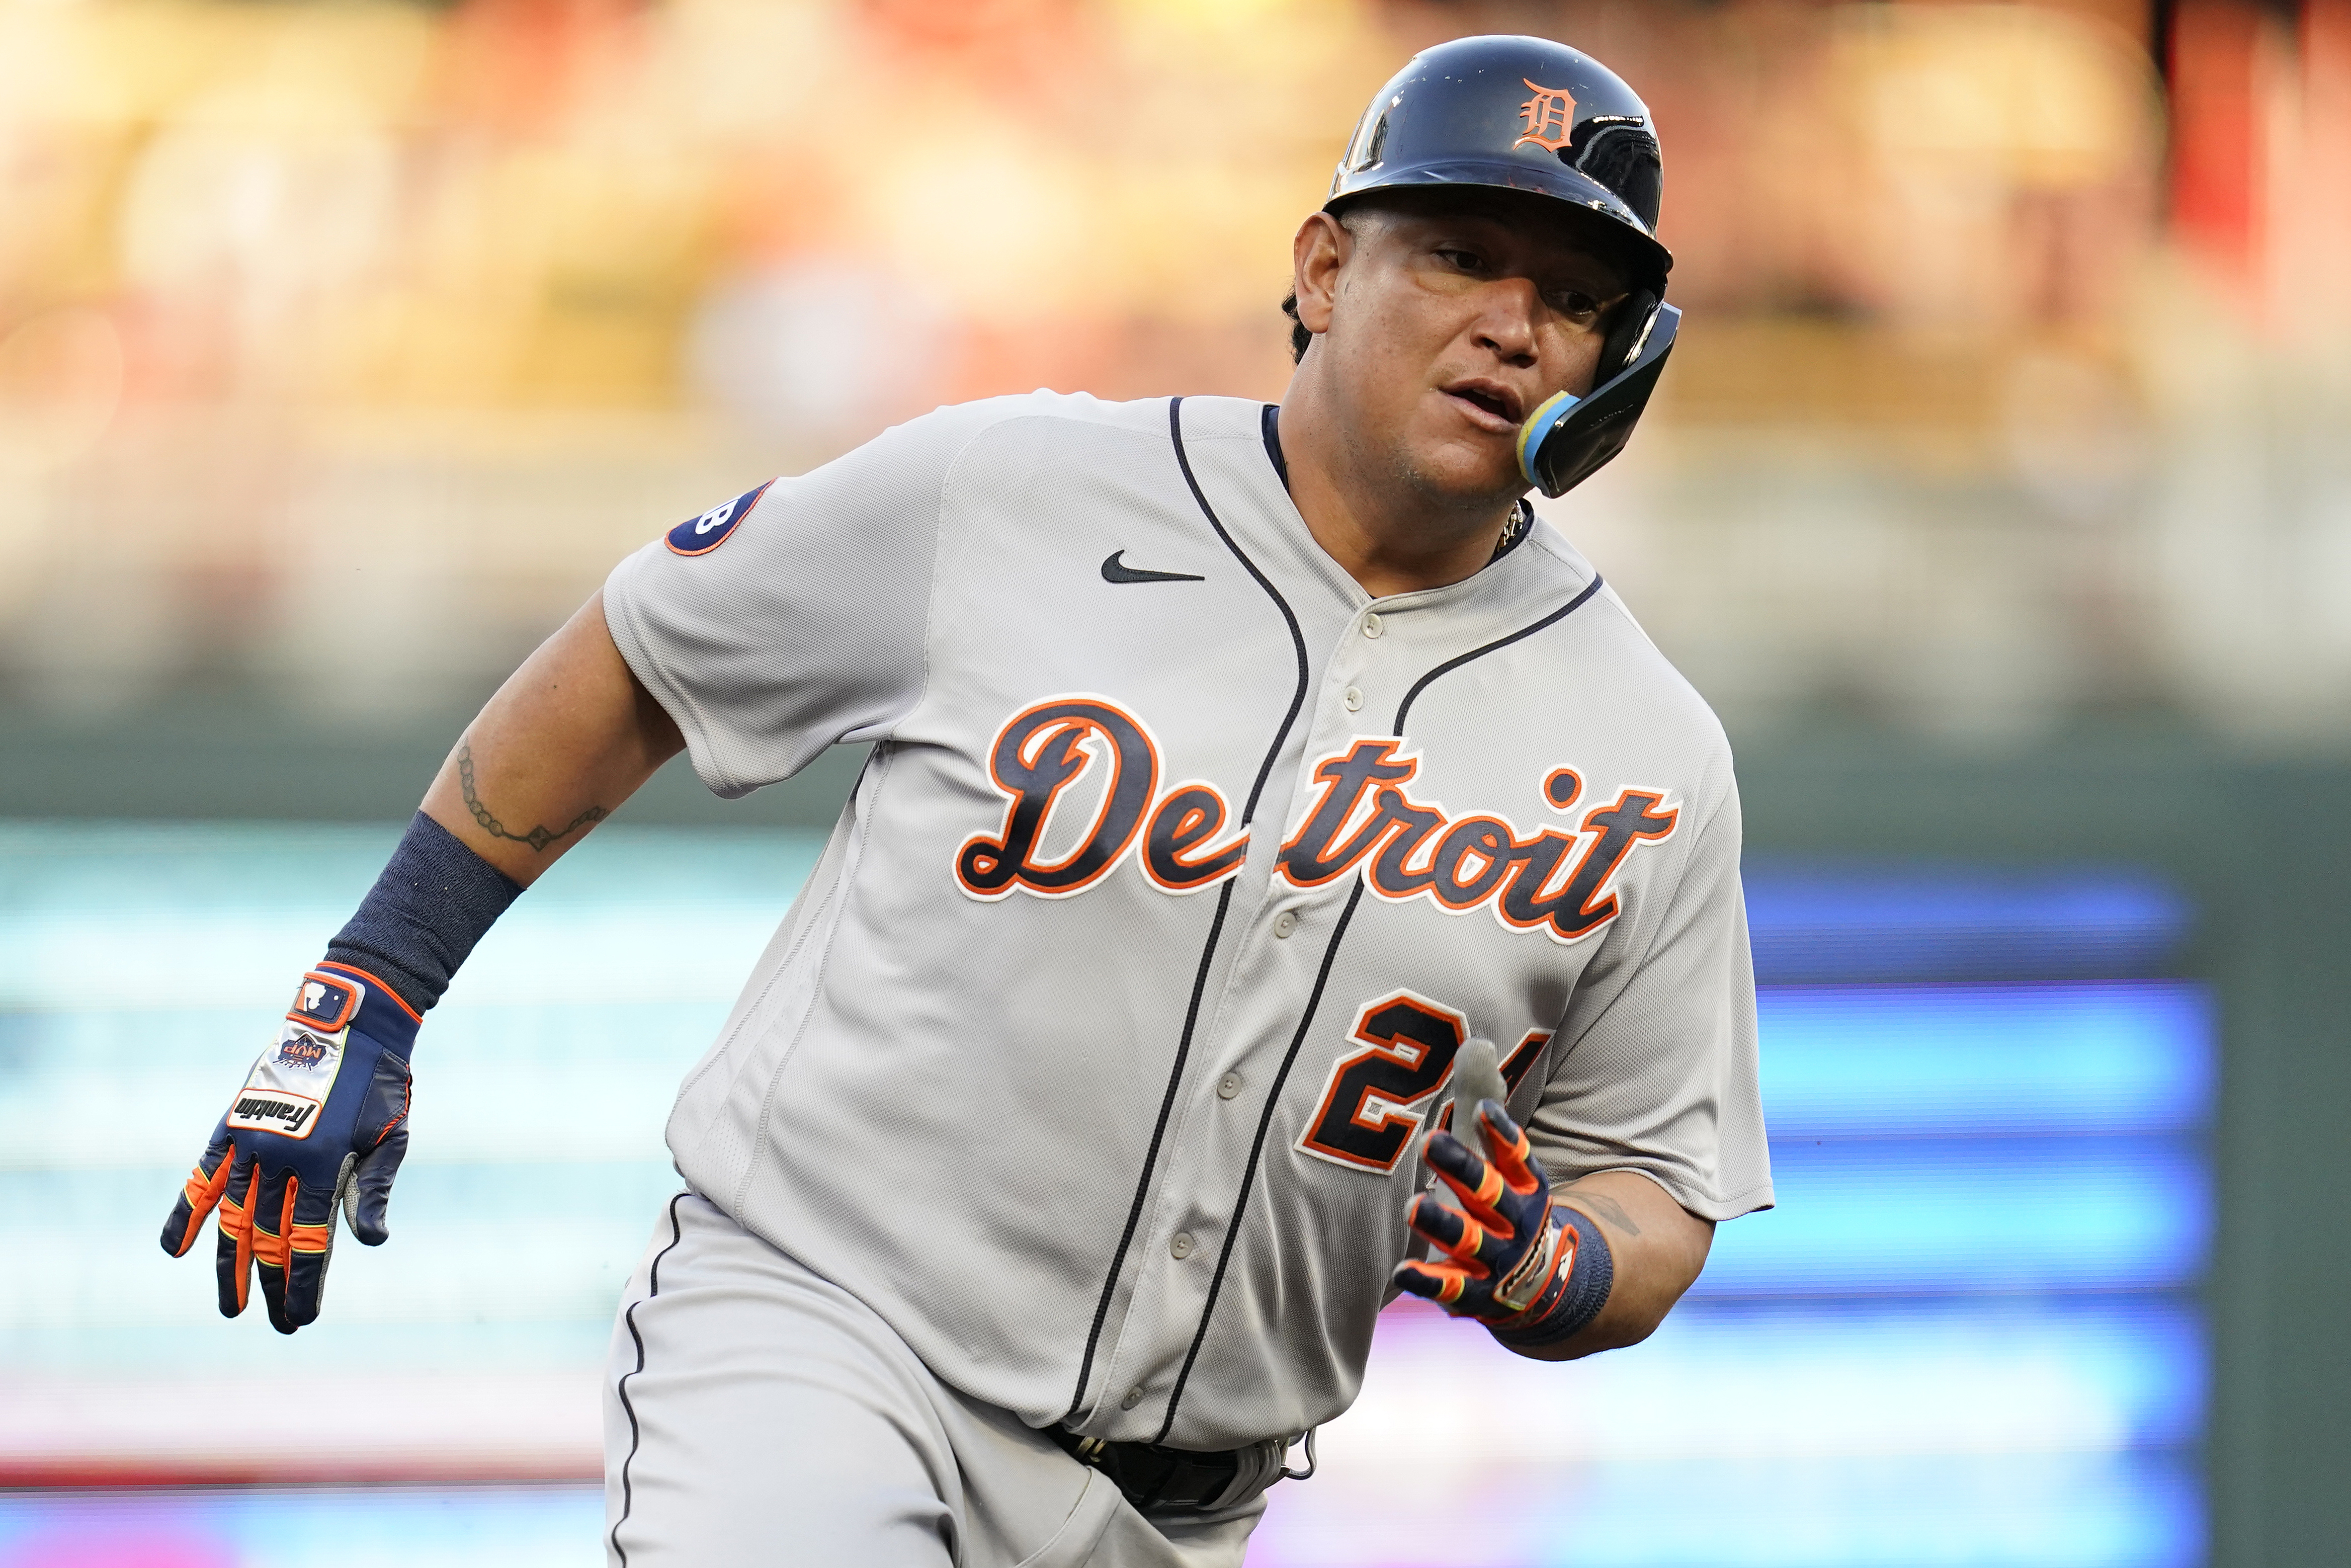 Detroit Tigers - You have 3,000 reasons (and counting) to celebrate Miguel  Cabrera this summer. Tickets for June 12 start as low as $24 now through  Tuesday: tigers.com/3000